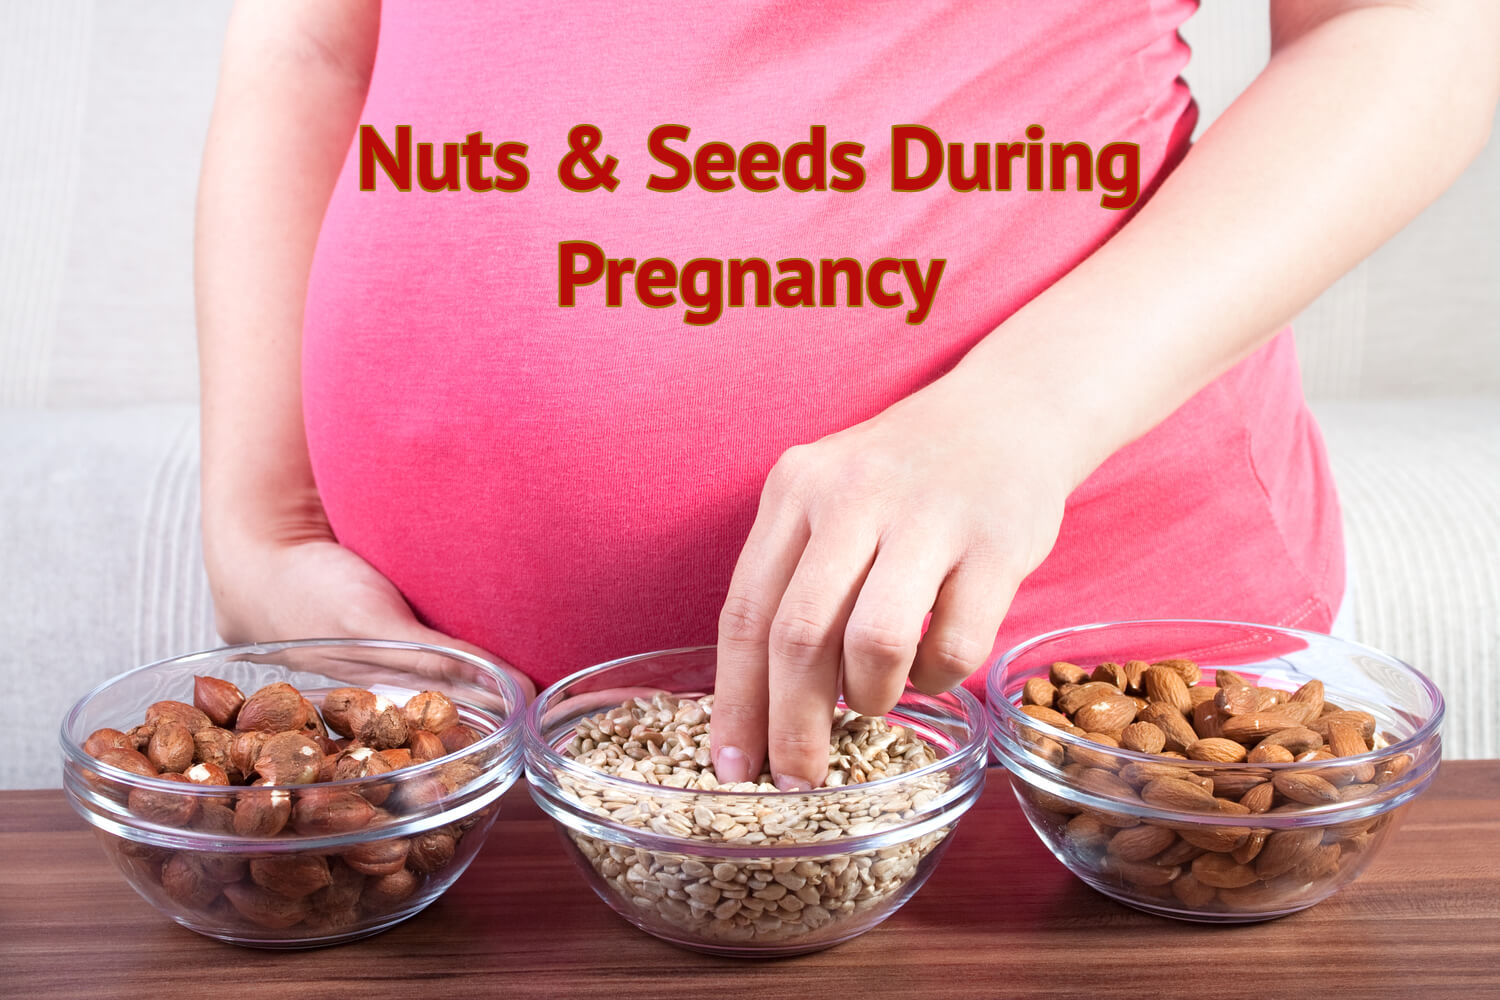 Nuts and Seeds During Pregnancy